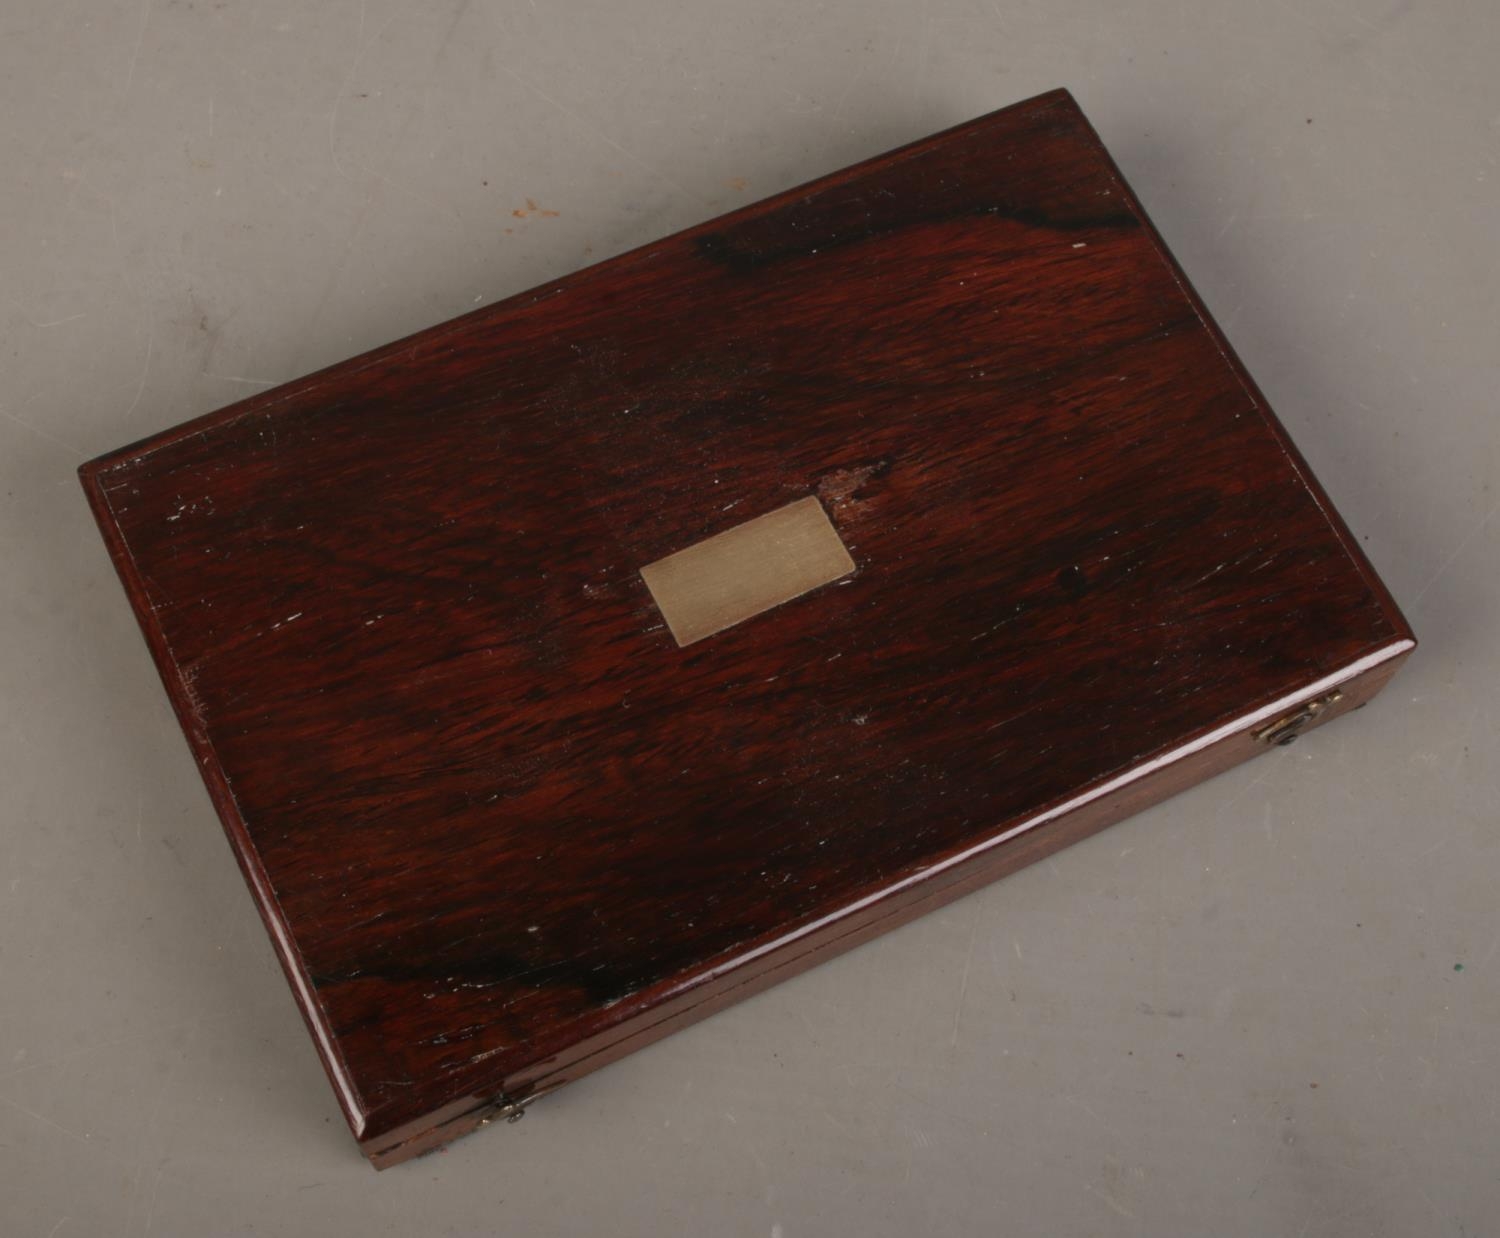 An antique rosewood box with collection of Chinese coins/tokens. - Image 2 of 2